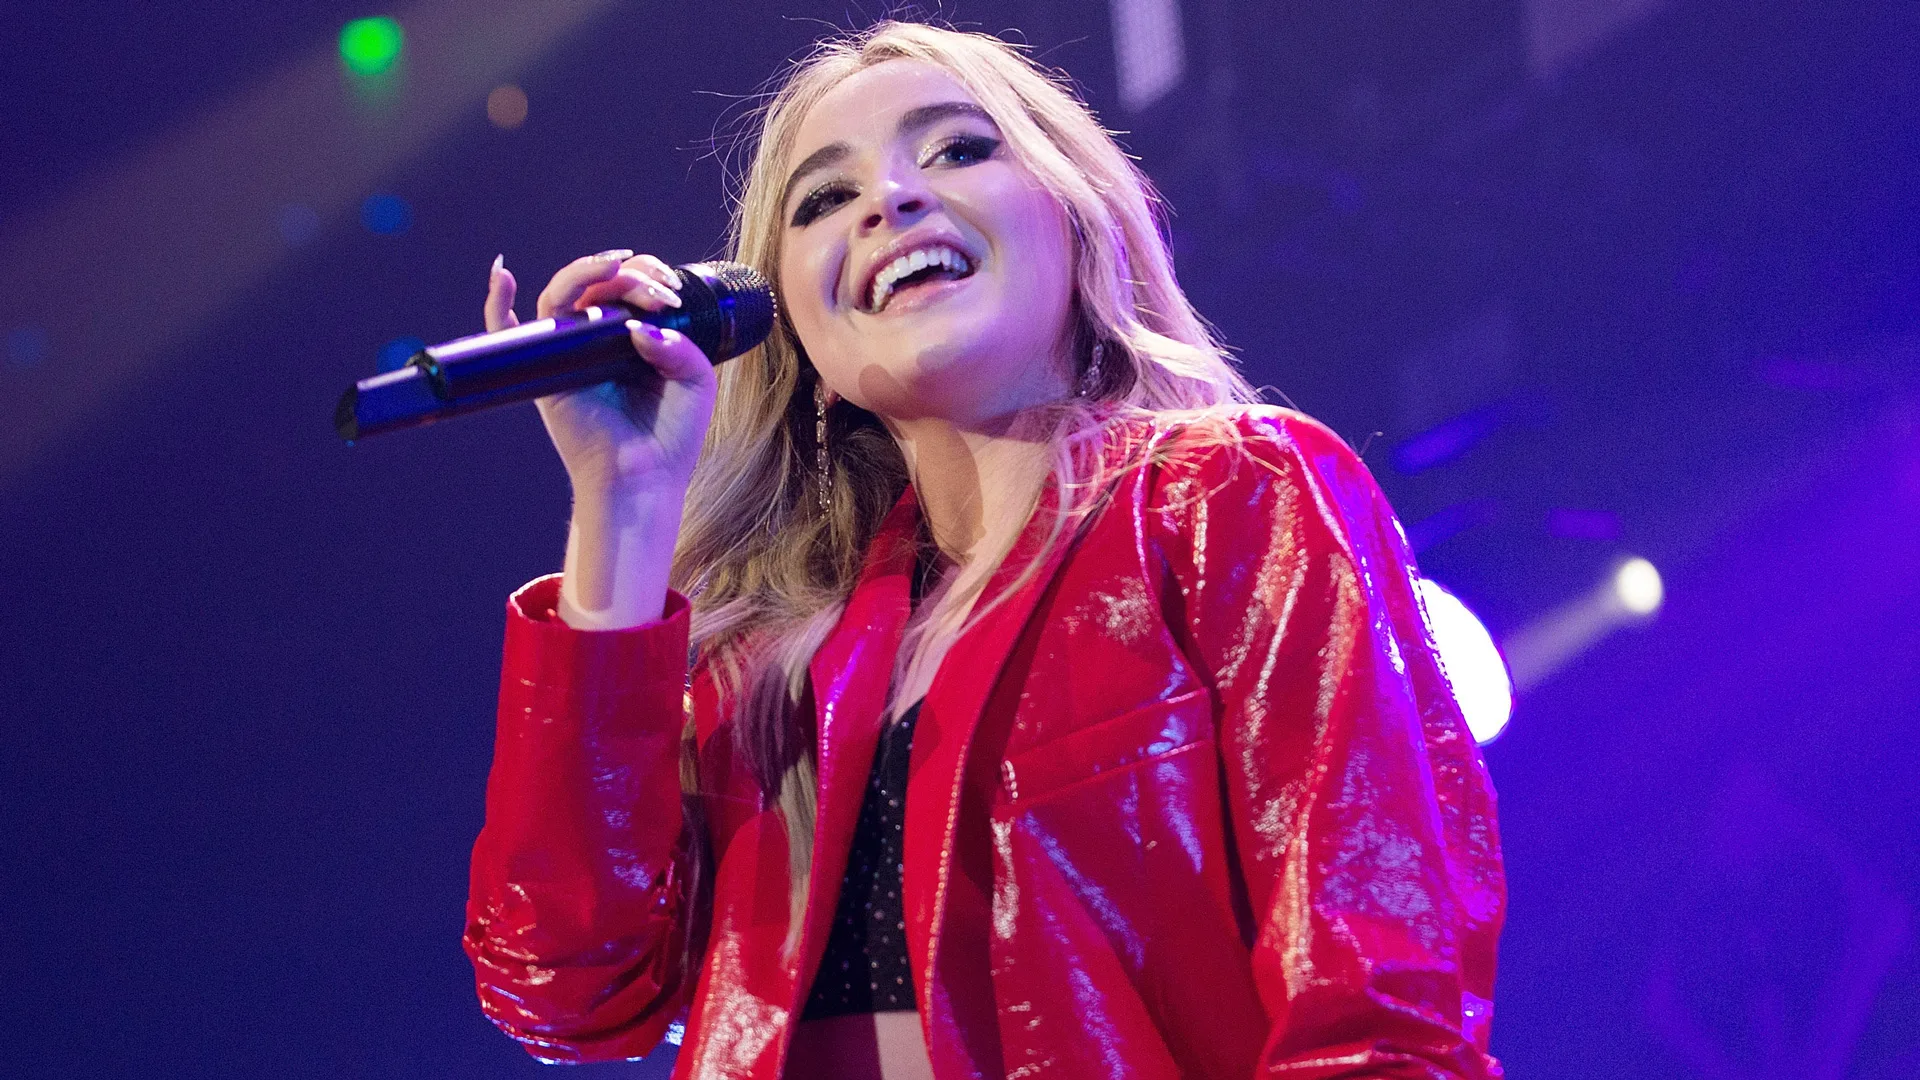 A photo of Sabrina Carpenter performing on stage in a red jacket with a mic to her face against a purple lit background